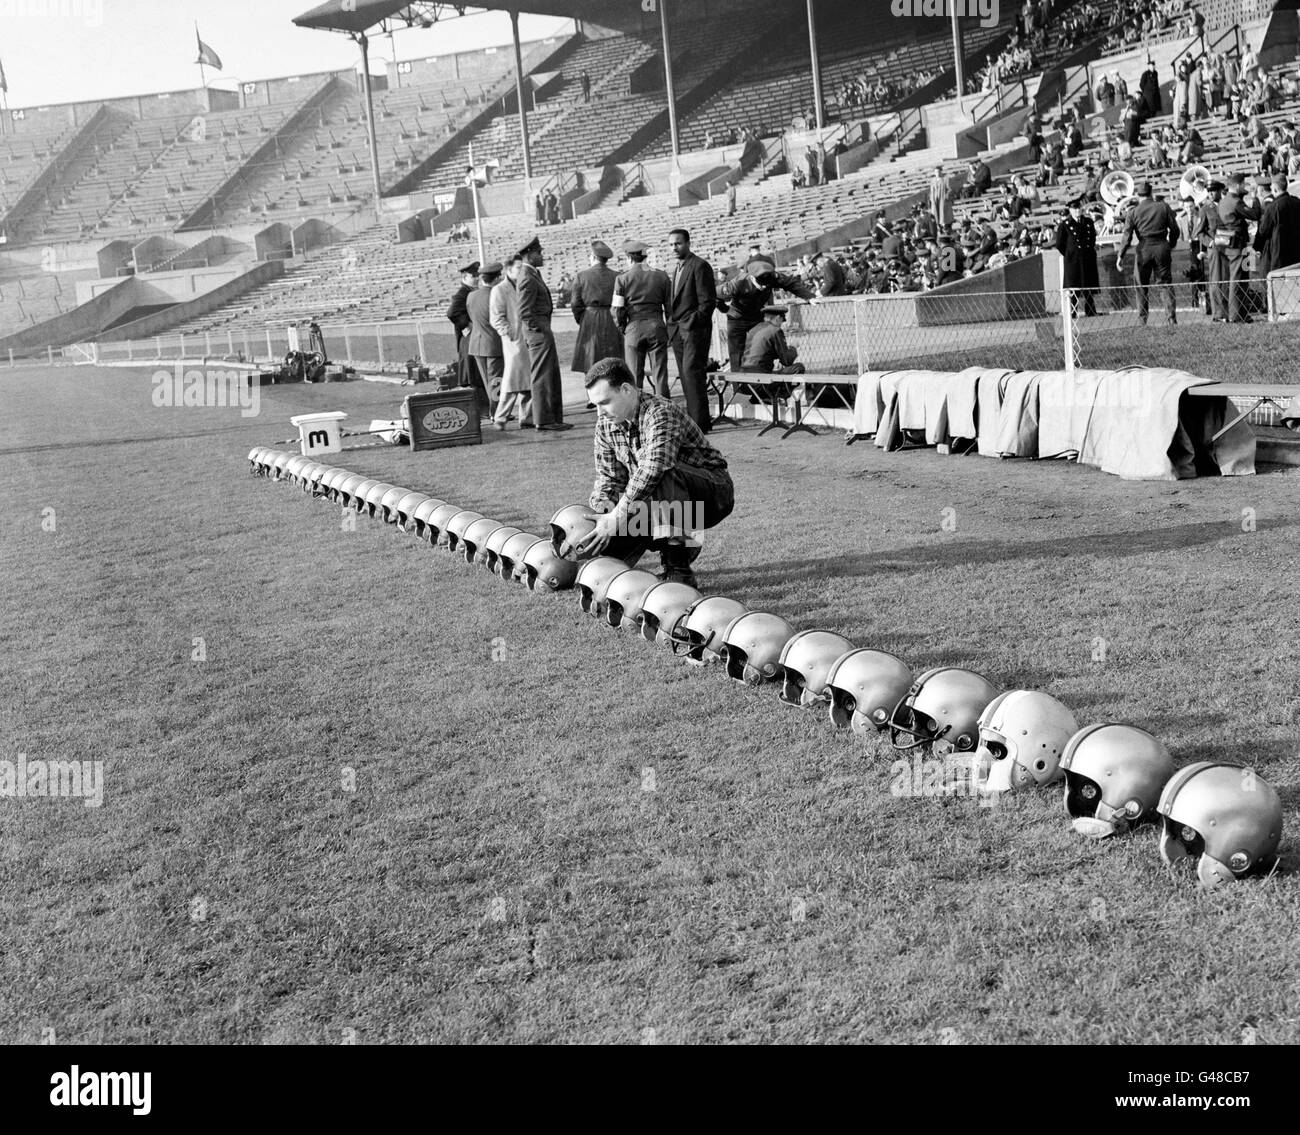 All ready for the match, a line of helmets are placed ready by J. Hanrahan, of Pennsylvania, the Team Manager of the London Rockets. Stock Photo